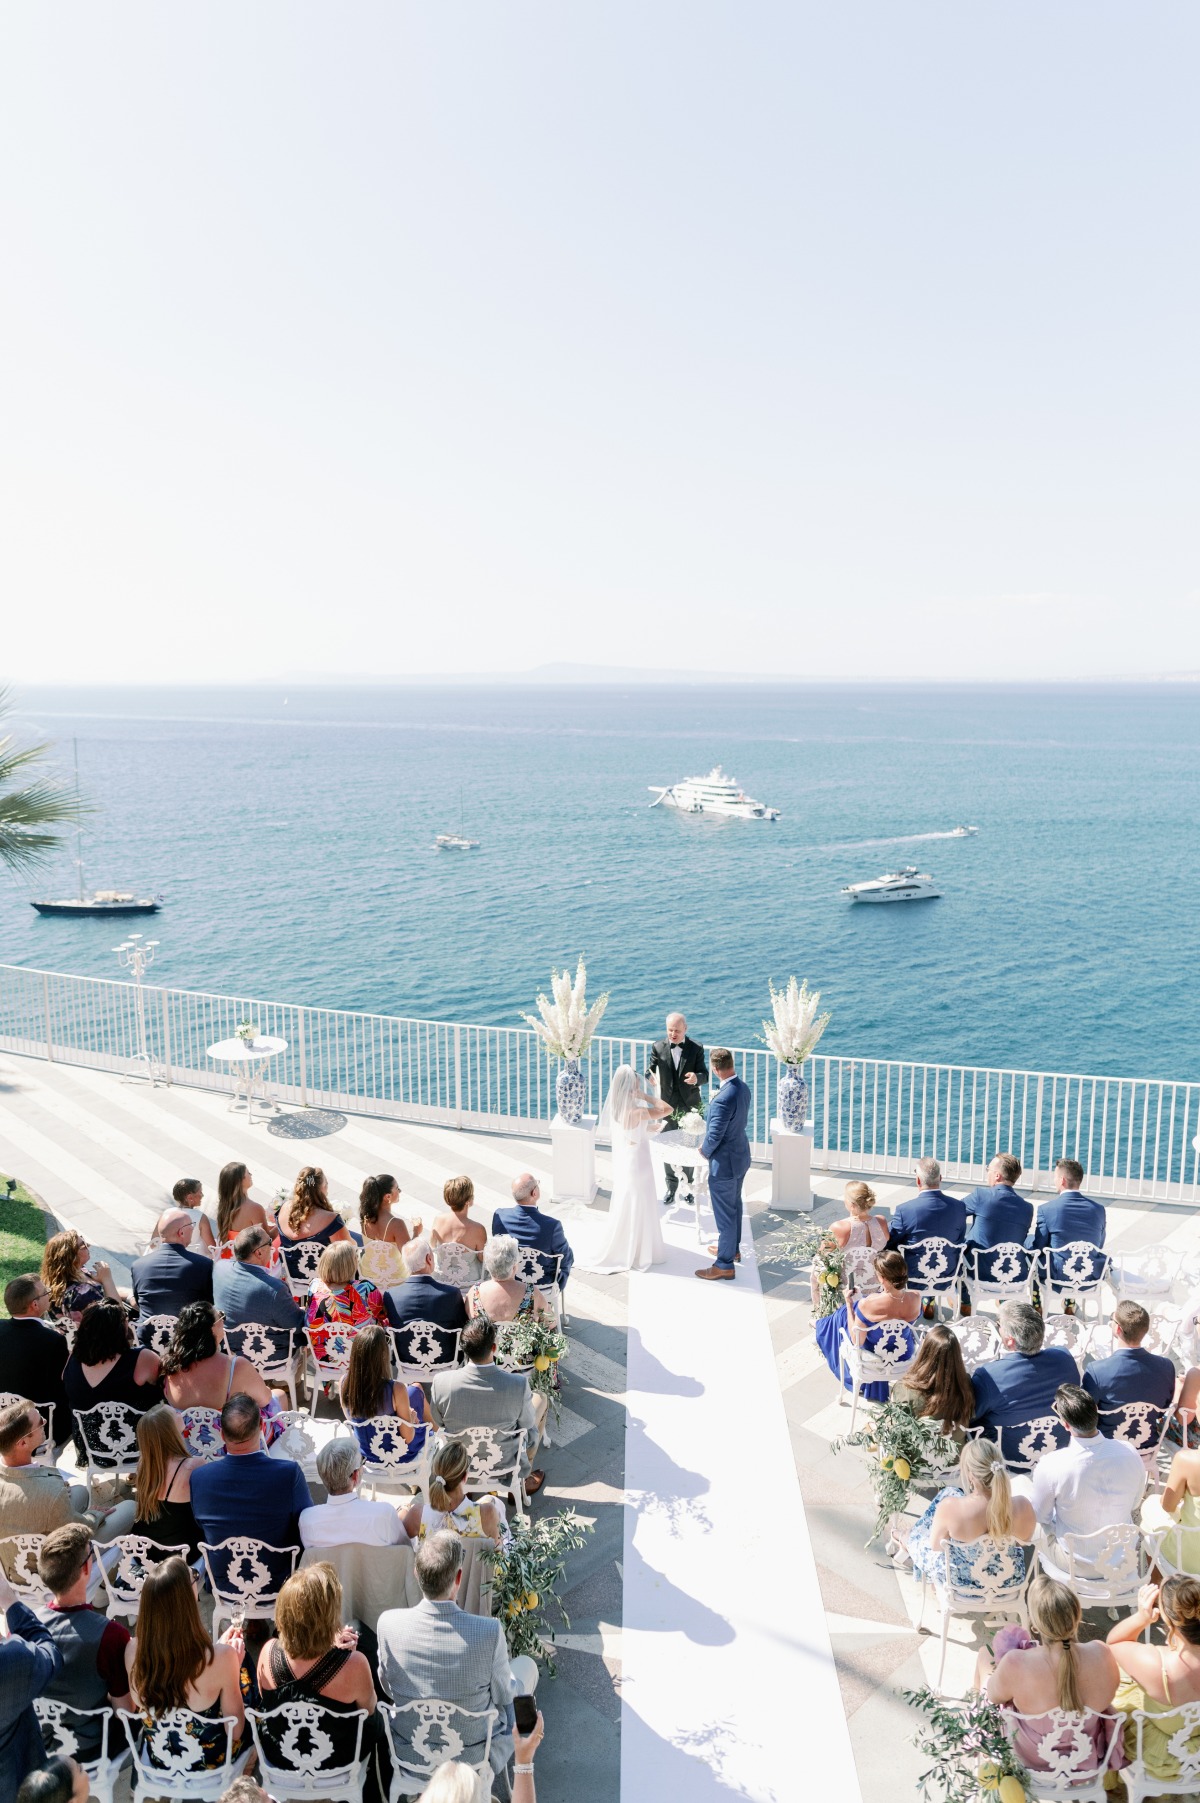 Cliffside wedding ceremony in Italy